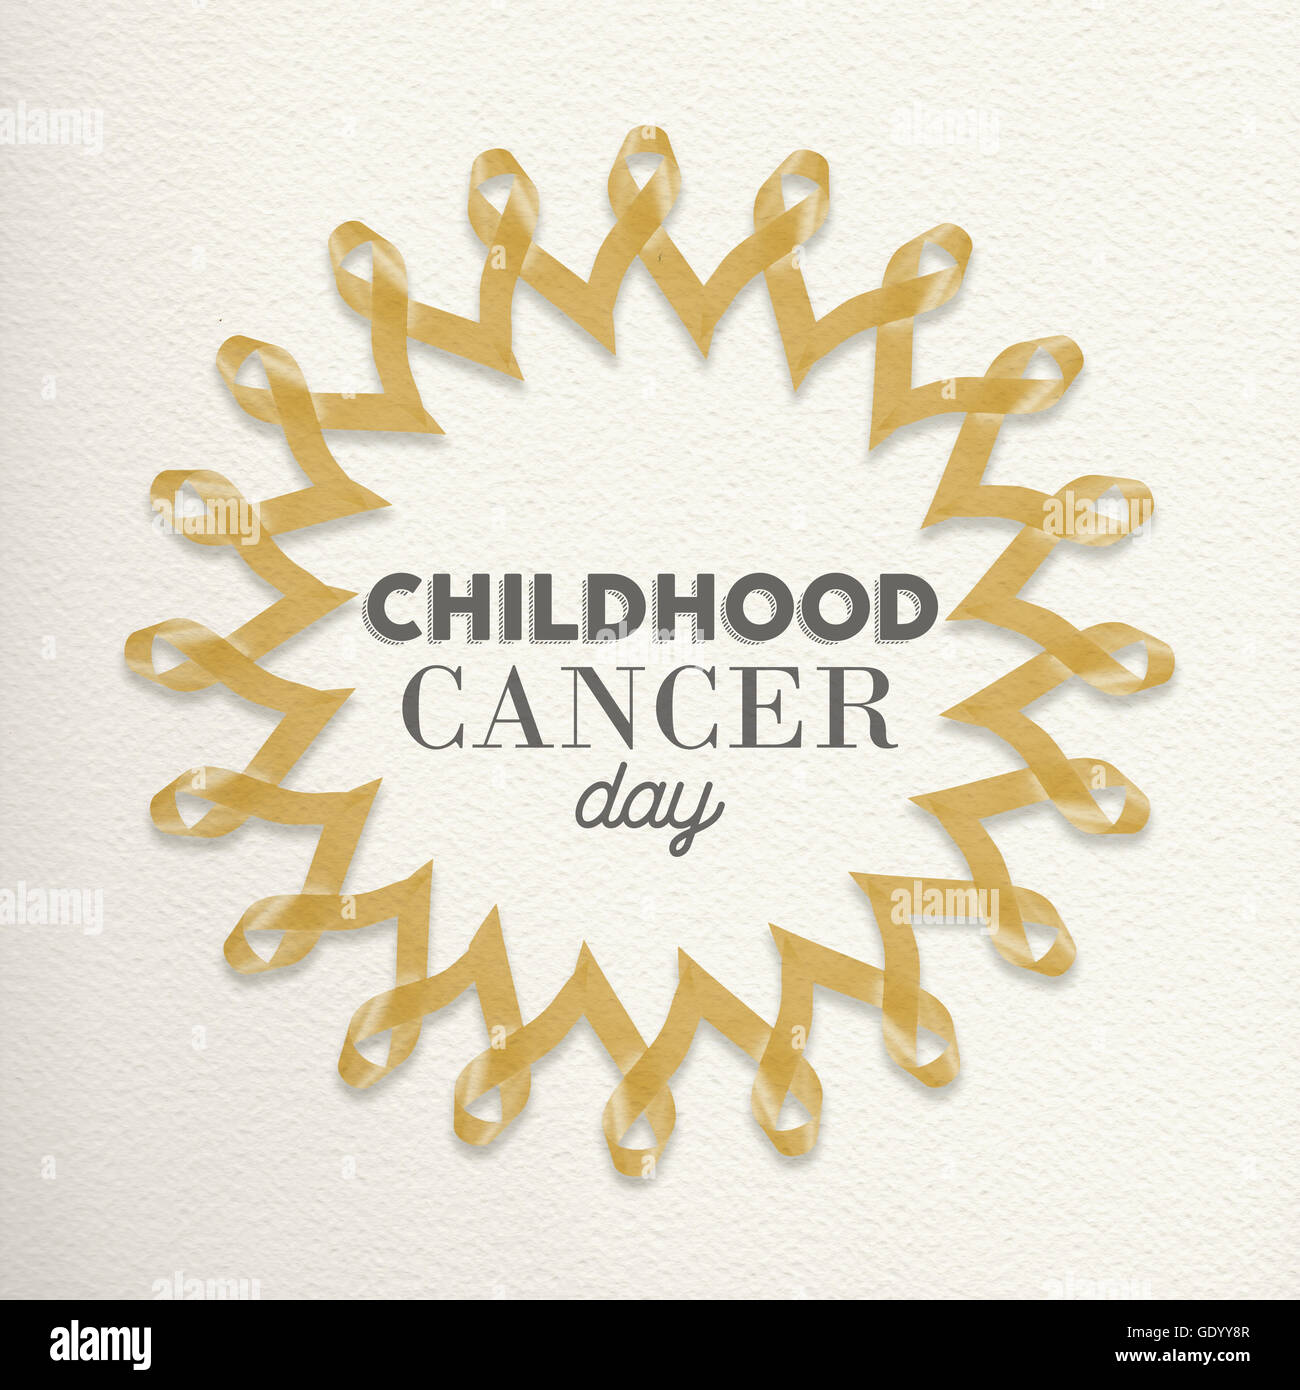 Childhood cancer day mandala design made of gold yellow ribbons with typography for awareness support. Stock Photo